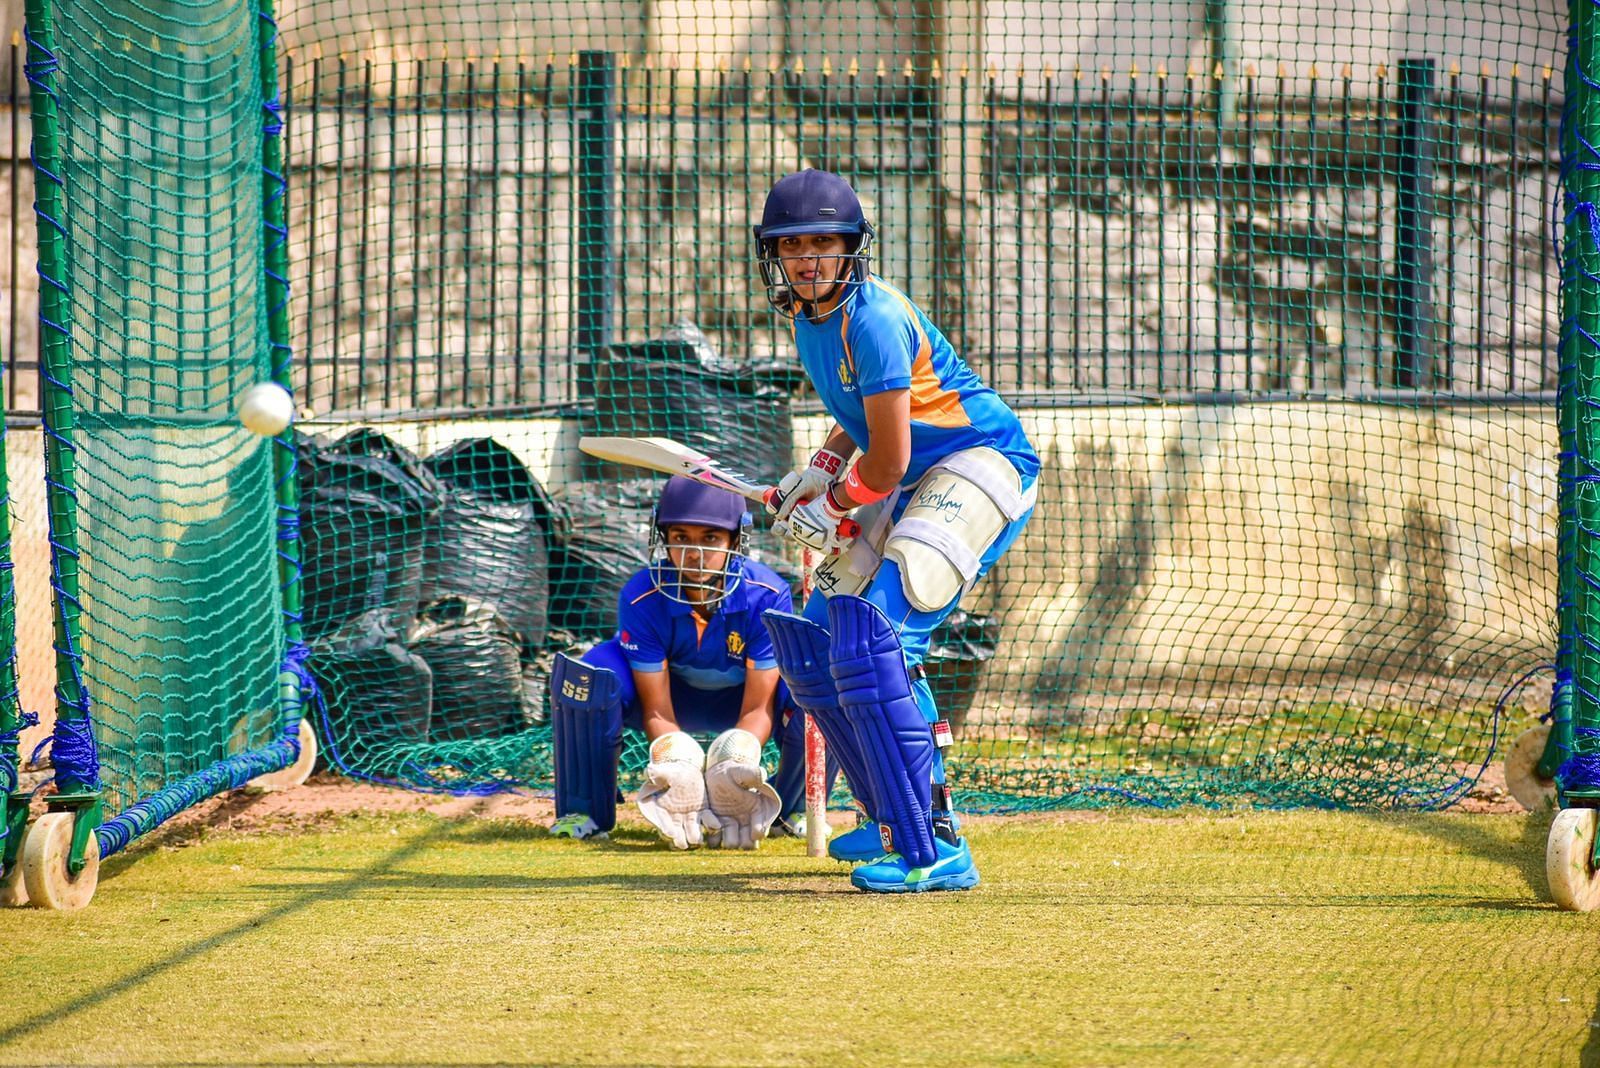 Veda Krishnamurthy in action during a practice session